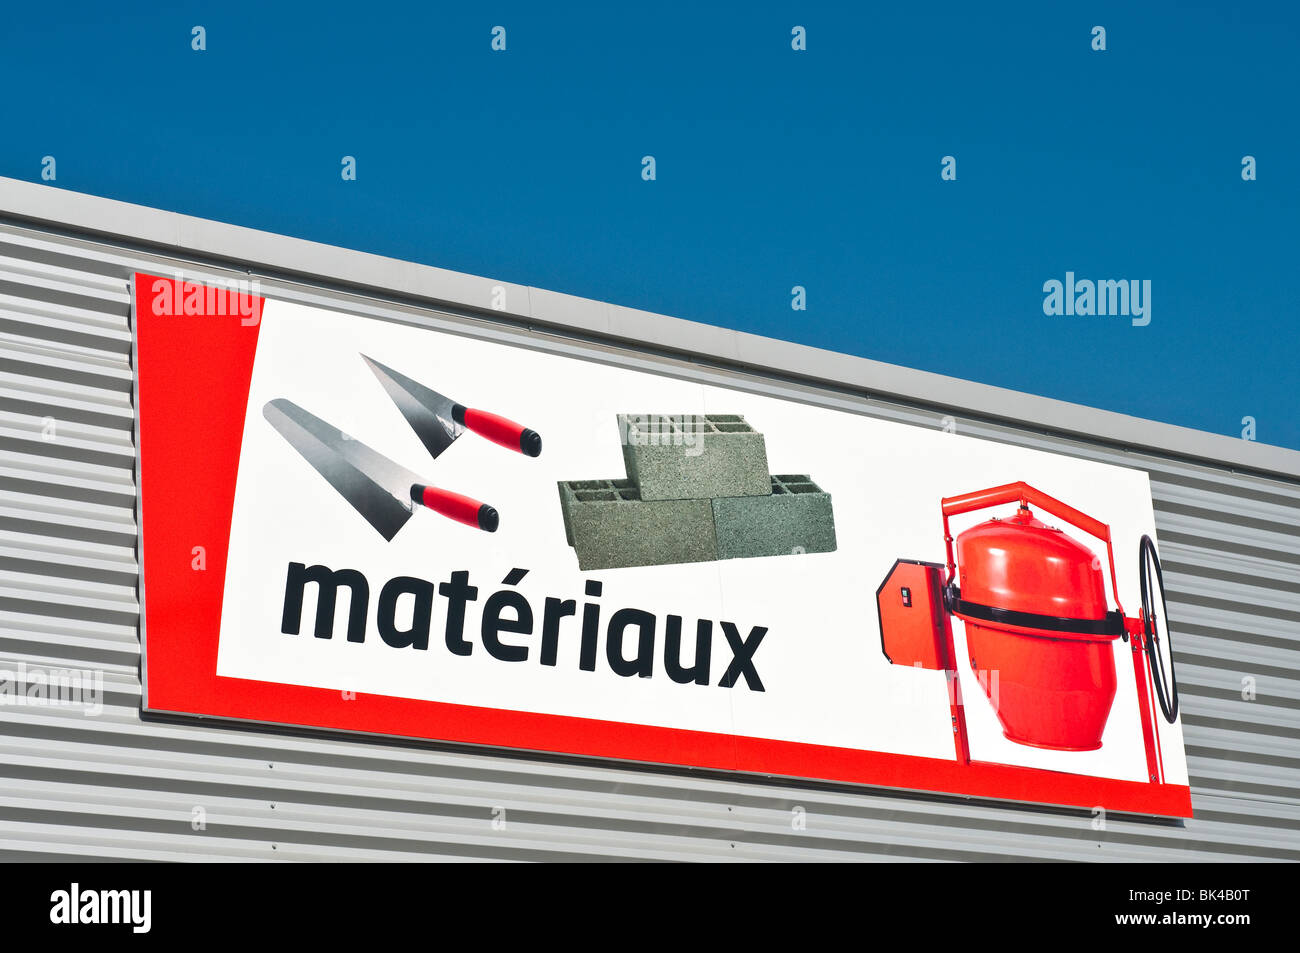 Bricomarché D-I-Y store 'matériaux' supplies advertising sign, France. Stock Photo